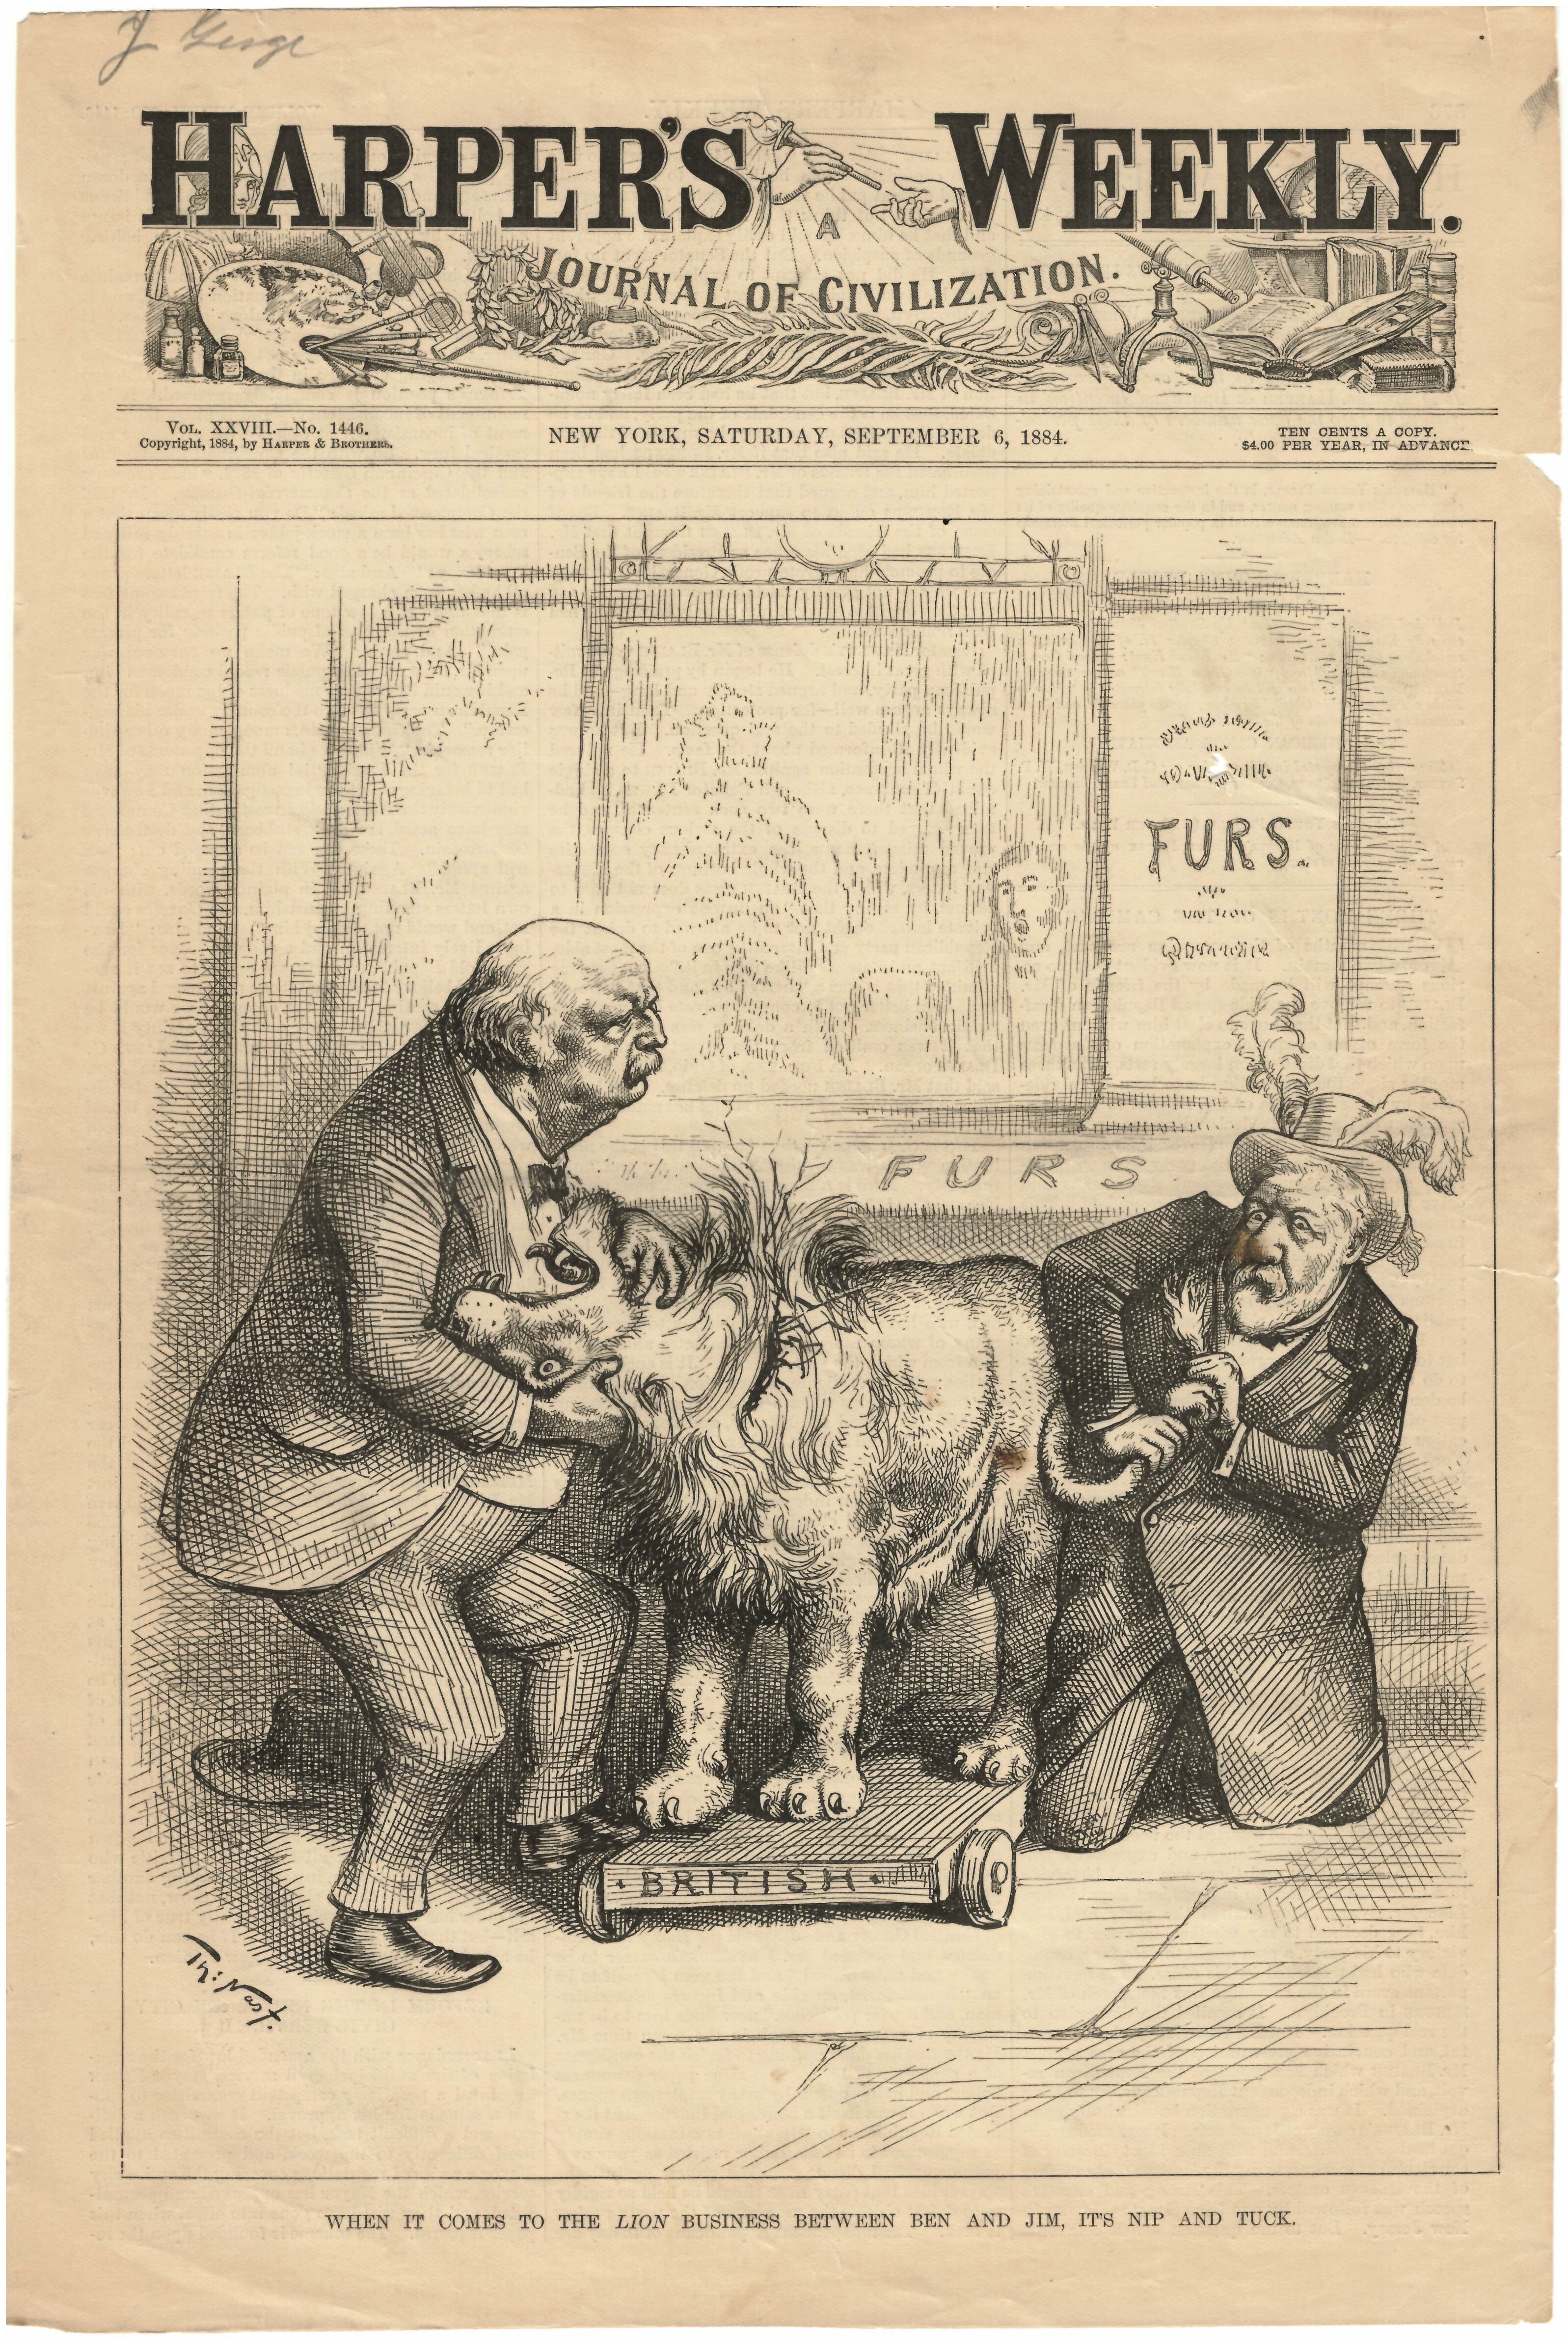 Harper's Weekly September 6, 1884 When It Comes To Lion Business Between Ben And Jim, It's Best To Nip And Tuck Cover Page Ad Print